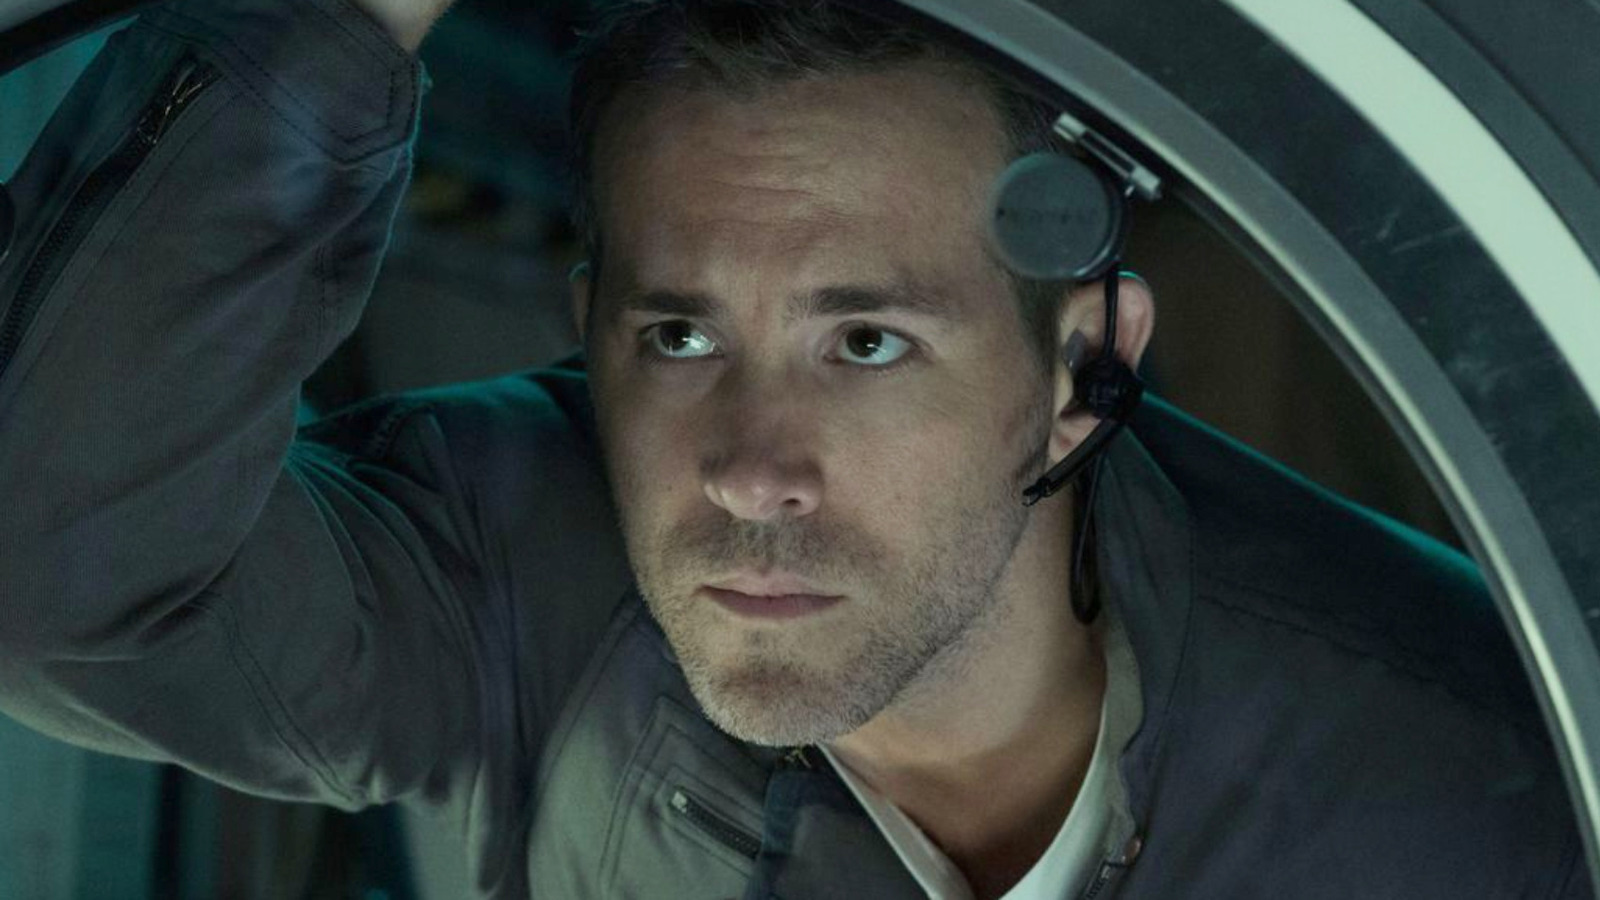 https://www.looper.com/img/gallery/the-ryan-reynolds-sci-fi-horror-movie-you-can-watch-on-amazon-prime-video-right-now/l-intro-1611241273.jpg